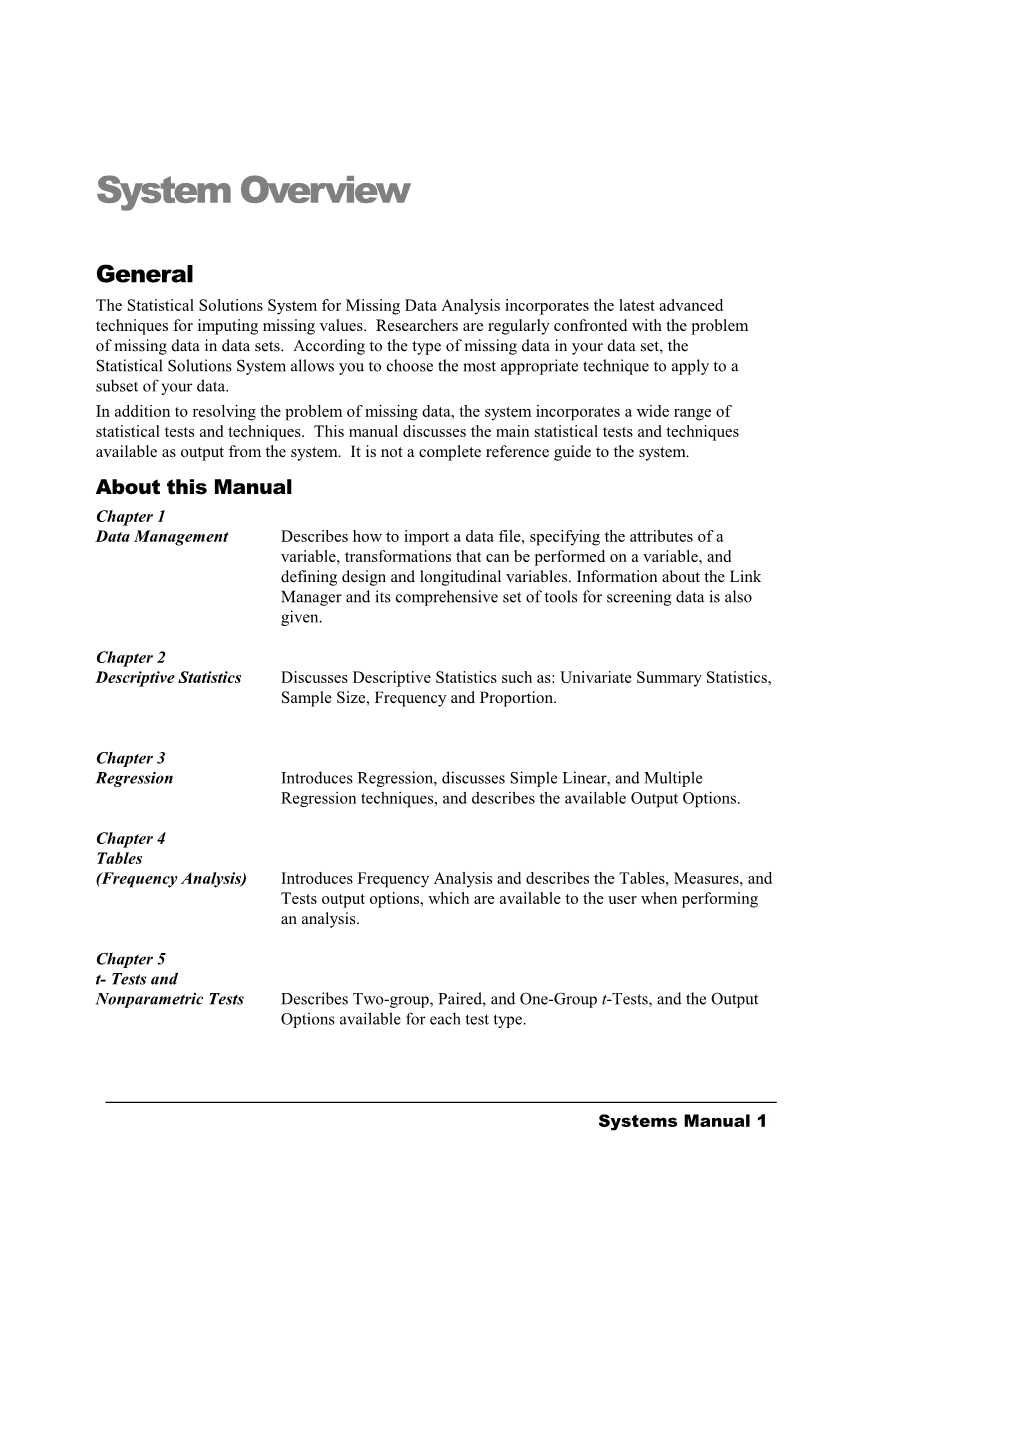 Systems Manual 1I Overview